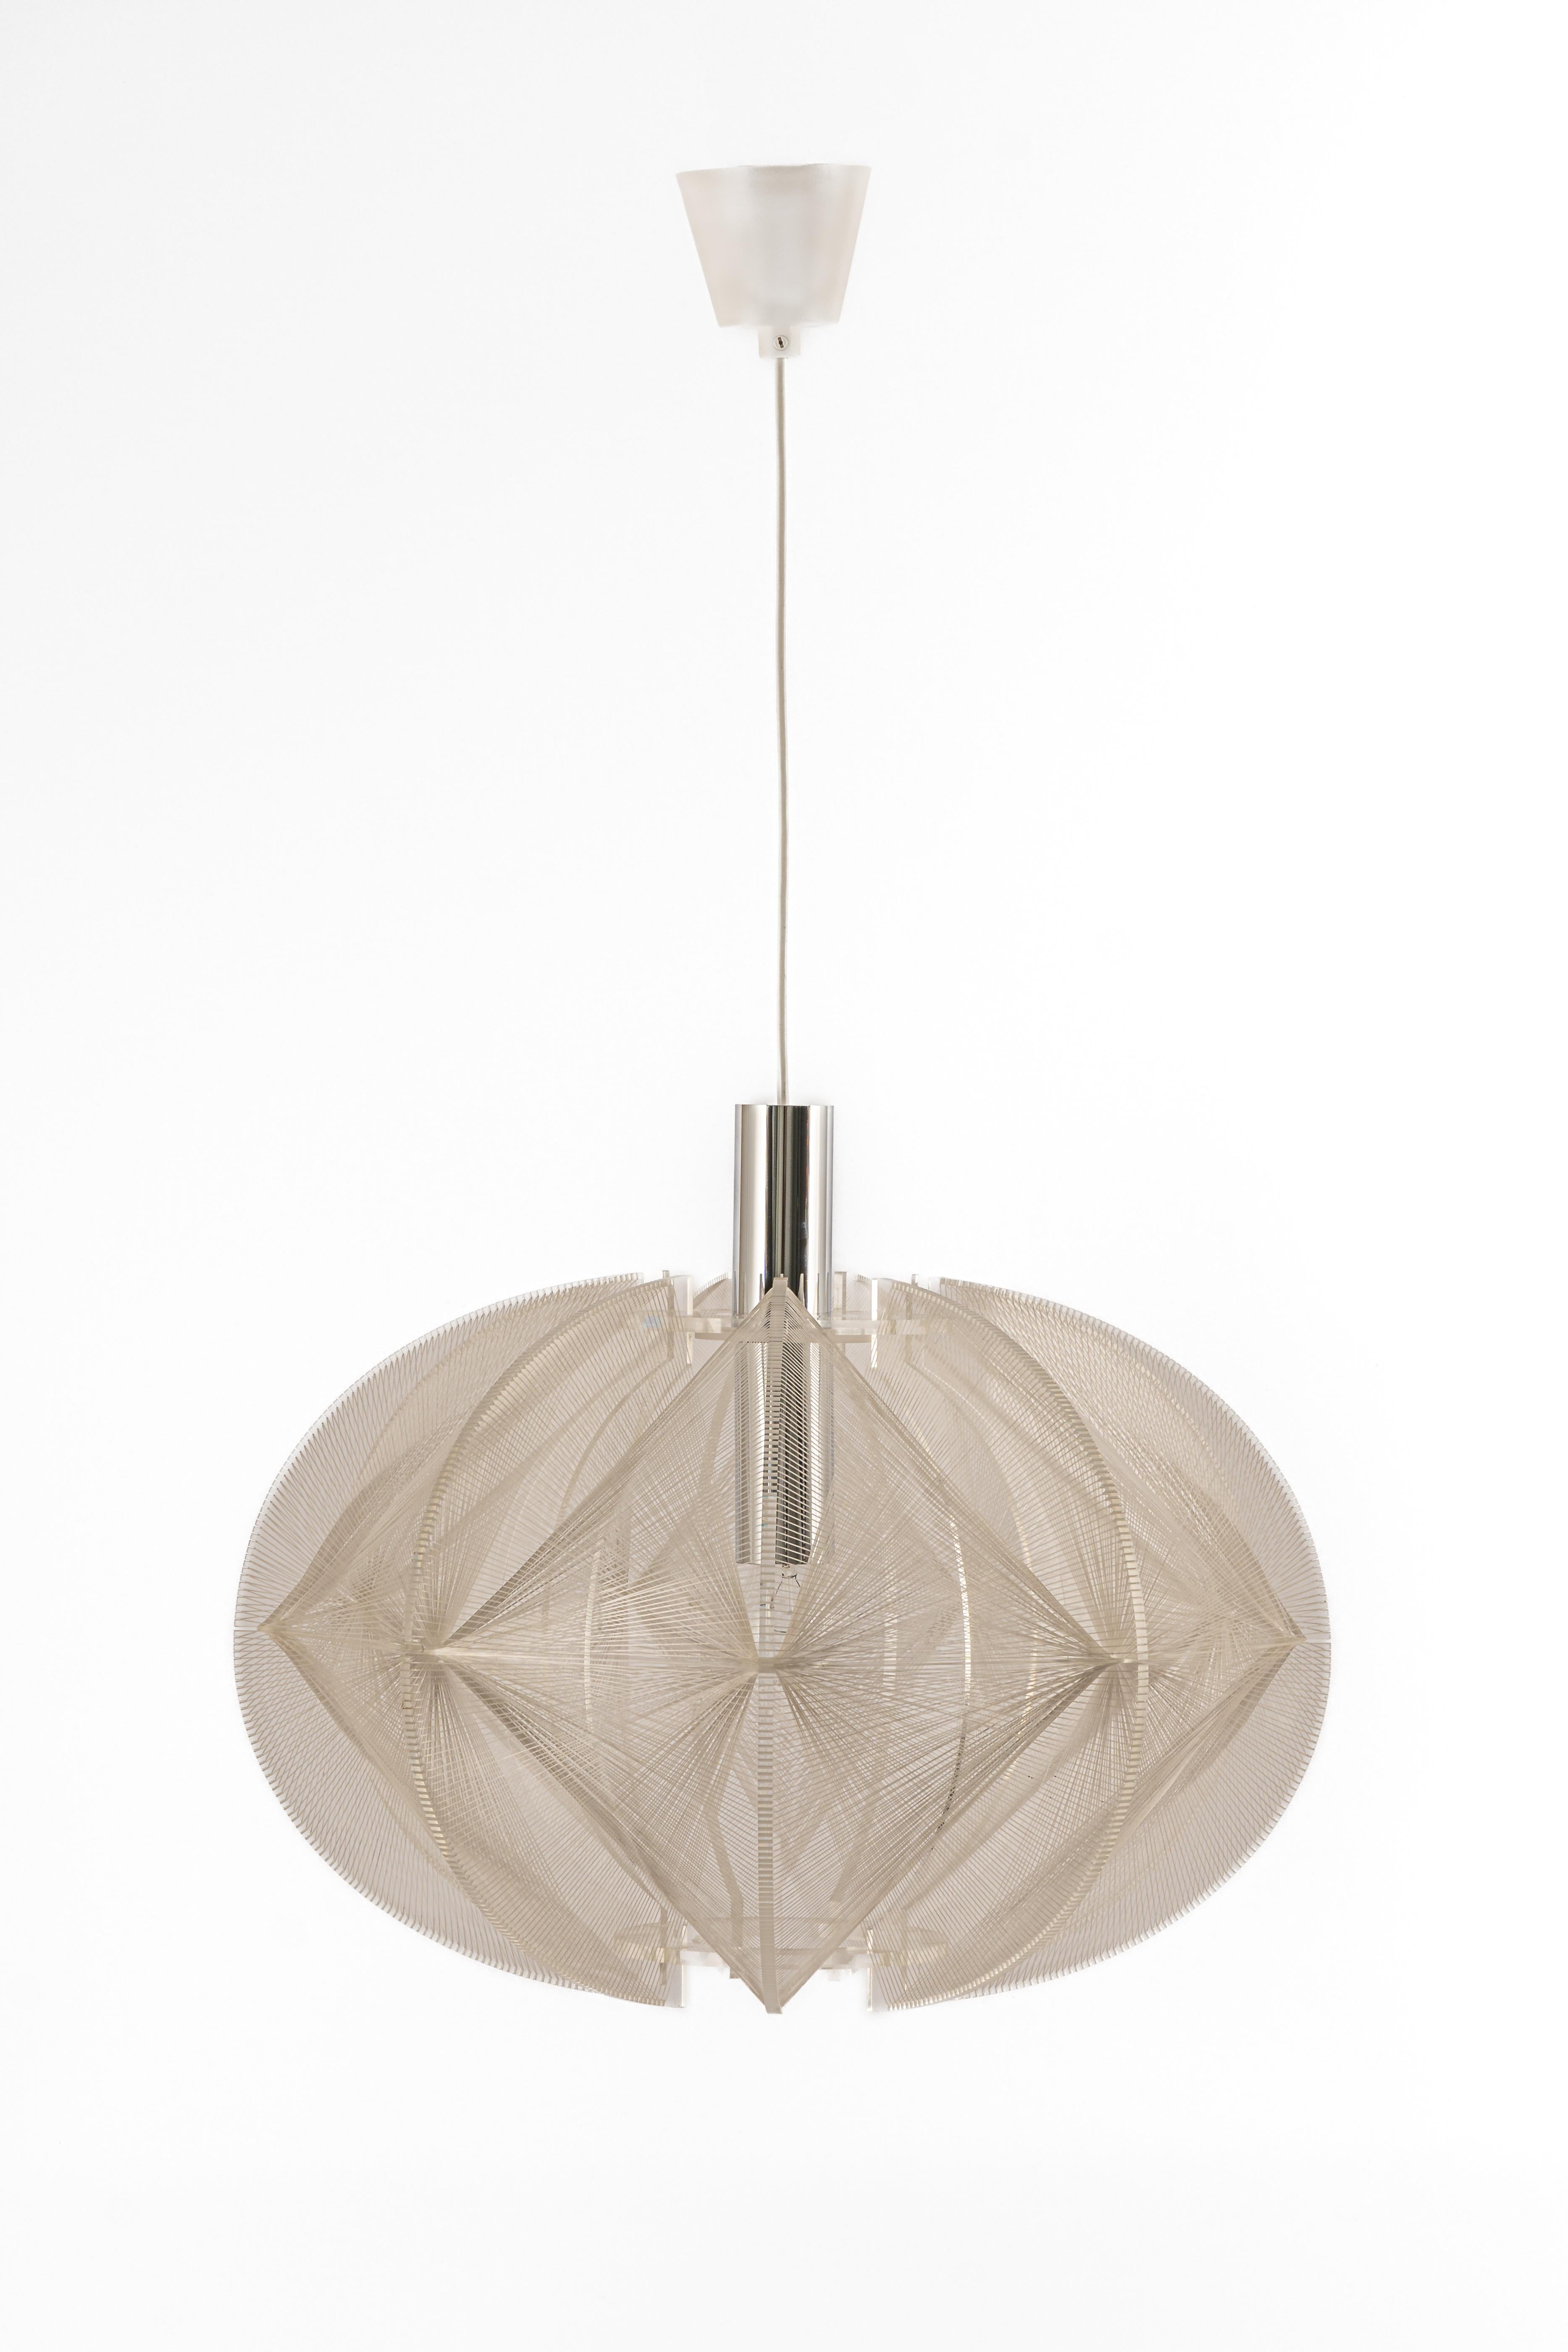 Late 20th Century Paul Secon for Sompex-Clear Wire Pendant Lamp, Germany, 1970s For Sale